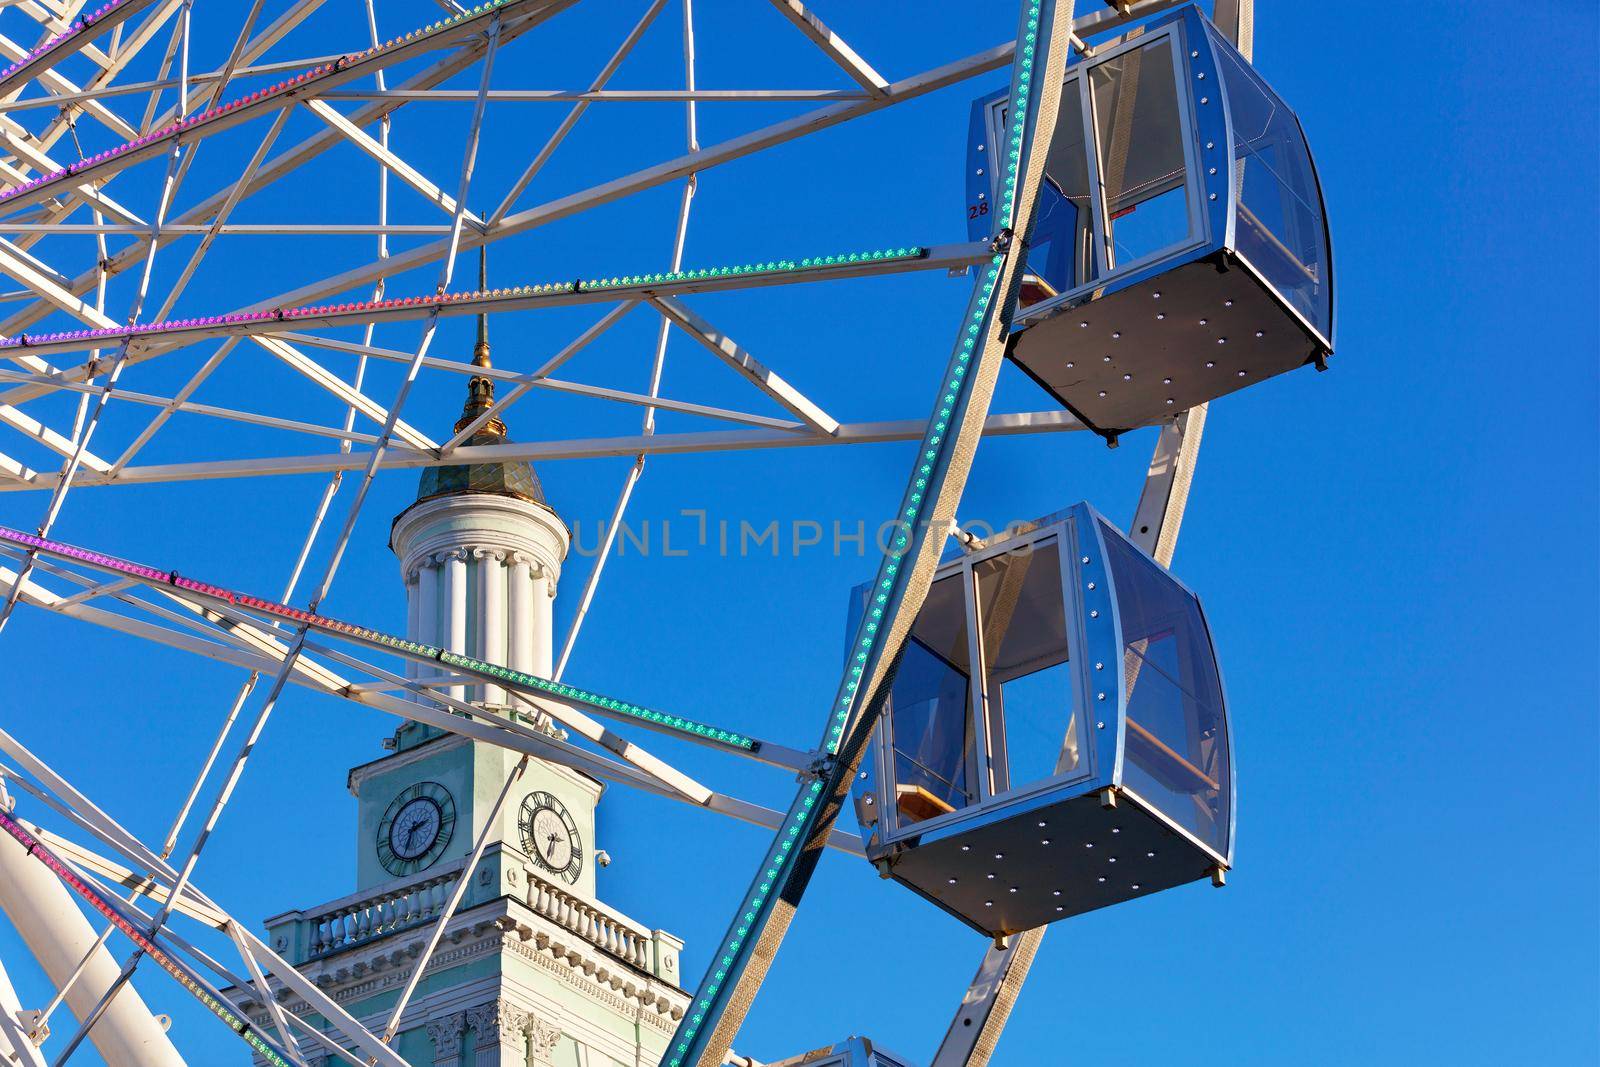 A beautiful and scenic view of the empty cabins of the Ferris wheel against the blue sky and the spire of the old clock tower in the afternoon.